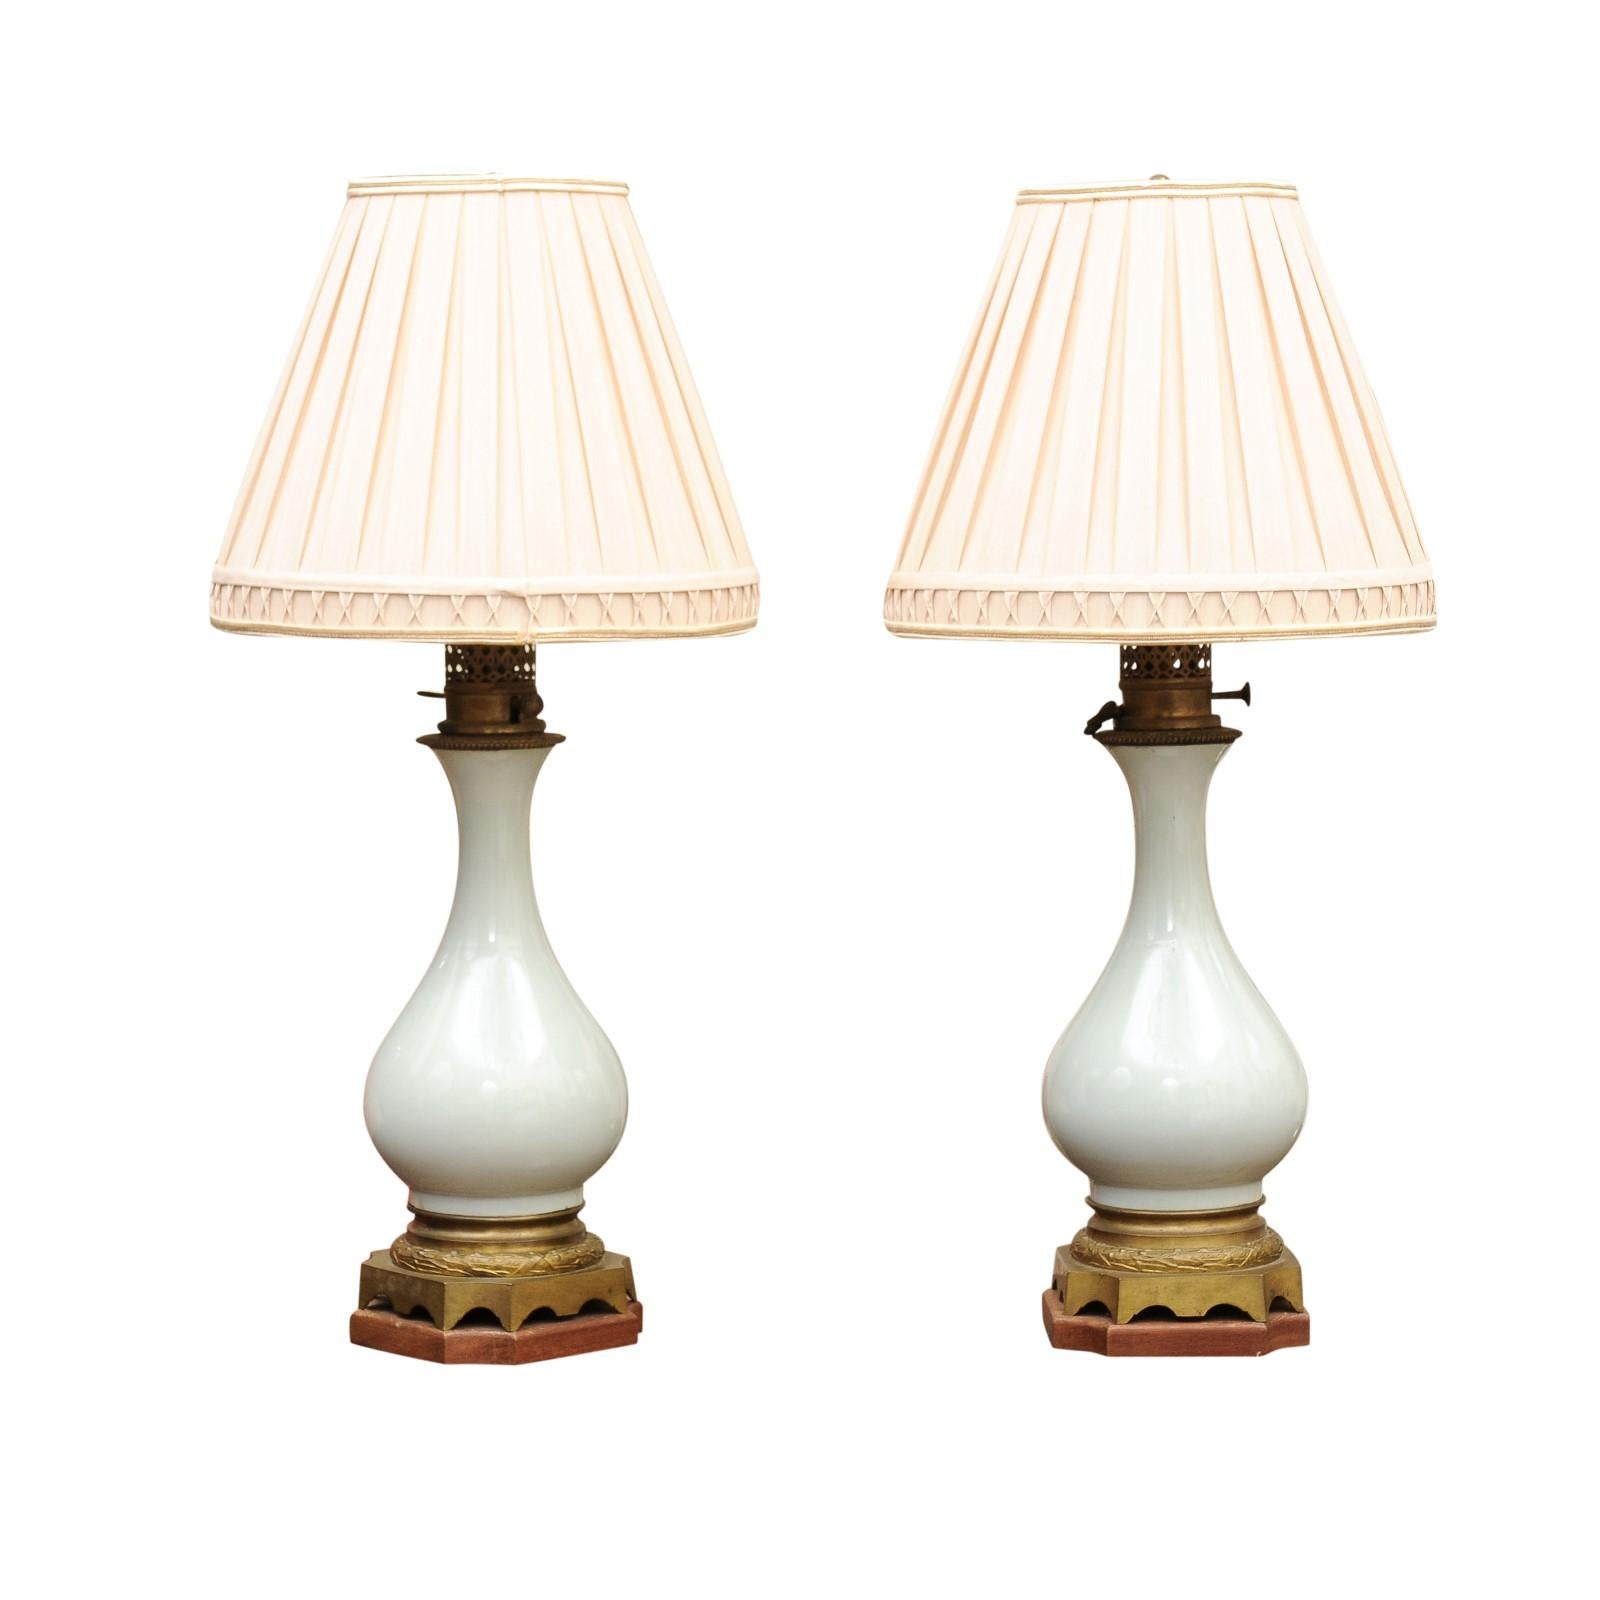 Pair of Late 19th Century Celadon Porcelain Vases Mounted on Bronze Bases, Wired as Lamps